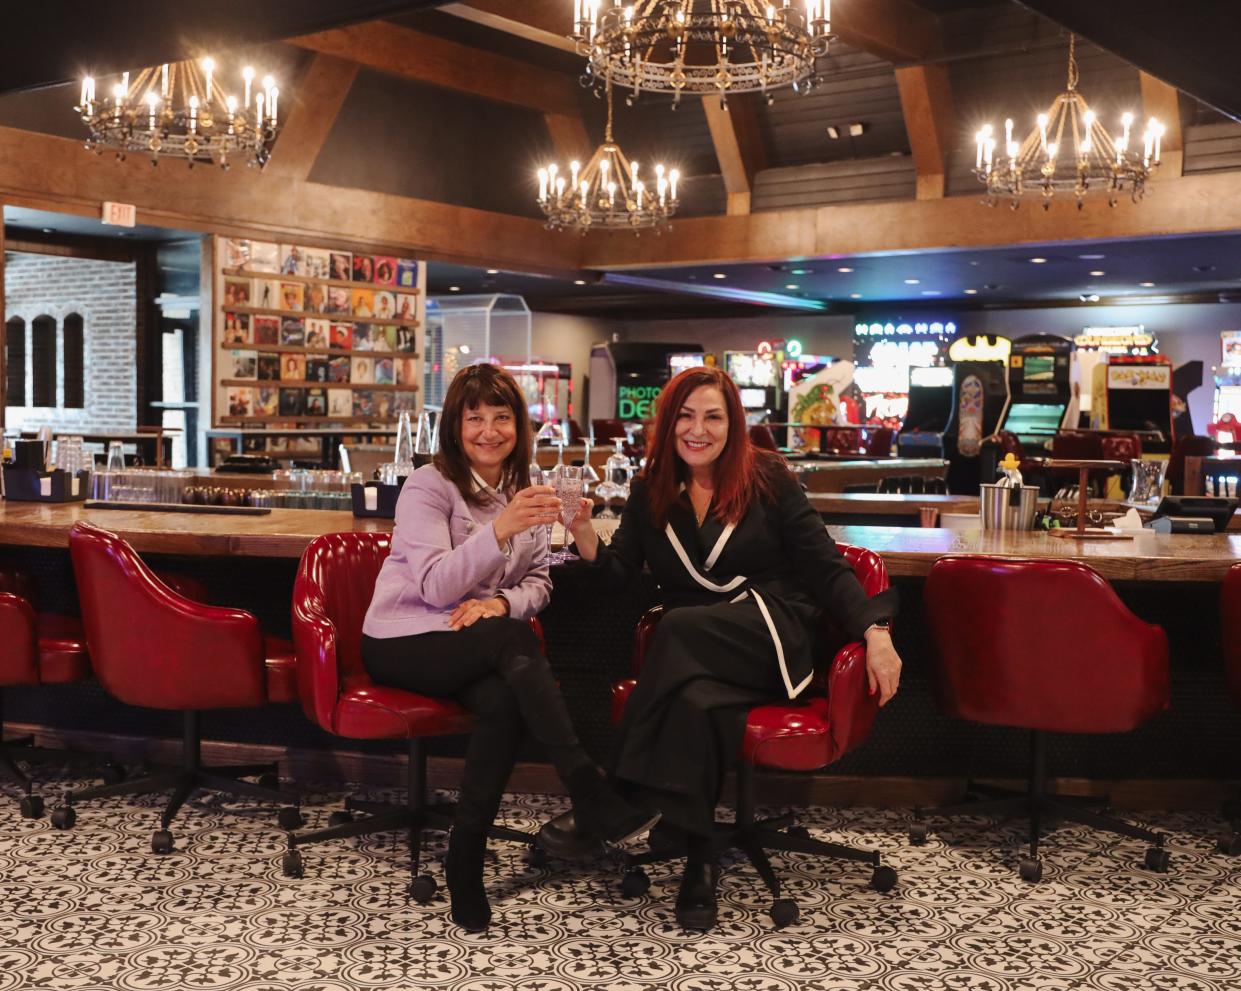 Angela Harrington, left and Danise Petsel clink glasses at the "sunken bar" inside the Supper Club of the newly-renovated Highlander Hotel in Iowa City, Iowa. Petsel's food service team is migrating from the Iowa River Power Restaurant, which closed in 2023 after a dispute between the Petsels and the building owner.